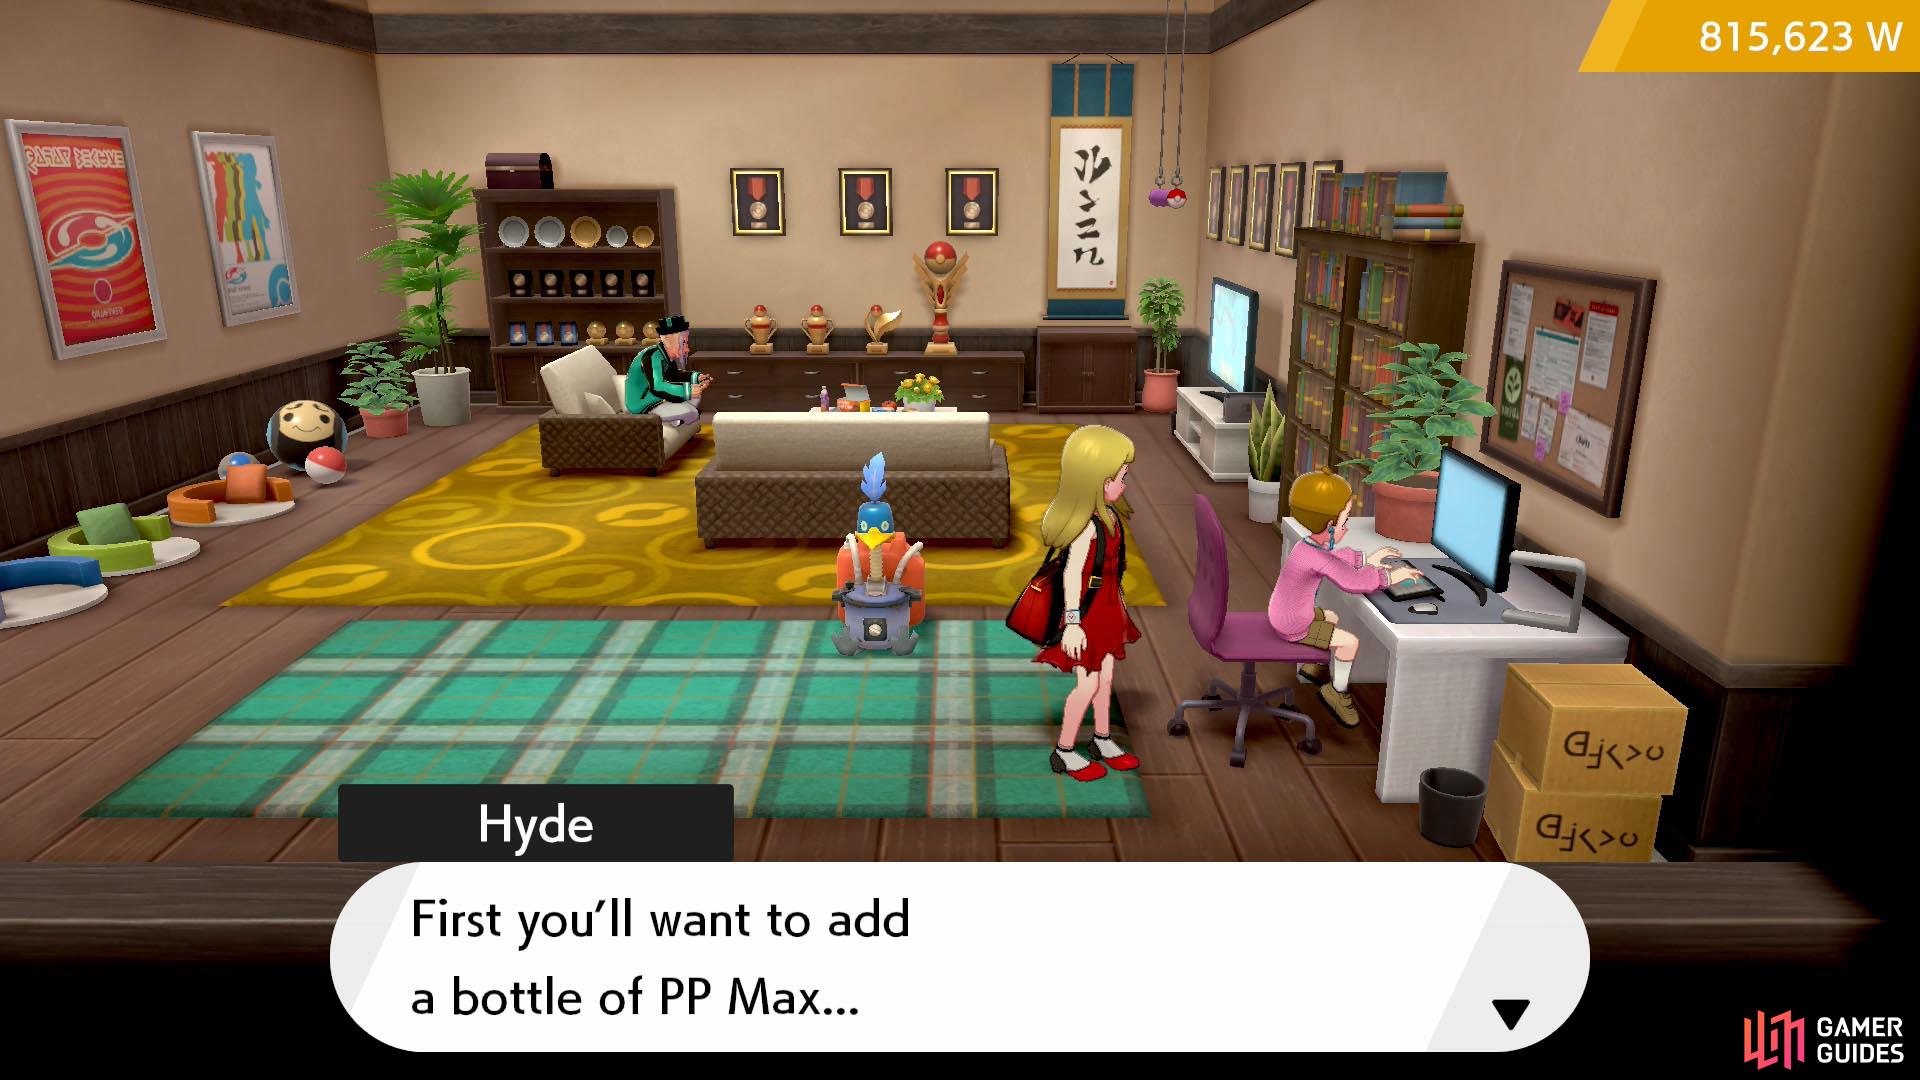 No, don’t use any PP Maxes; they’re too valuable. Use a Rare Candy or Bottle Cap if you must.